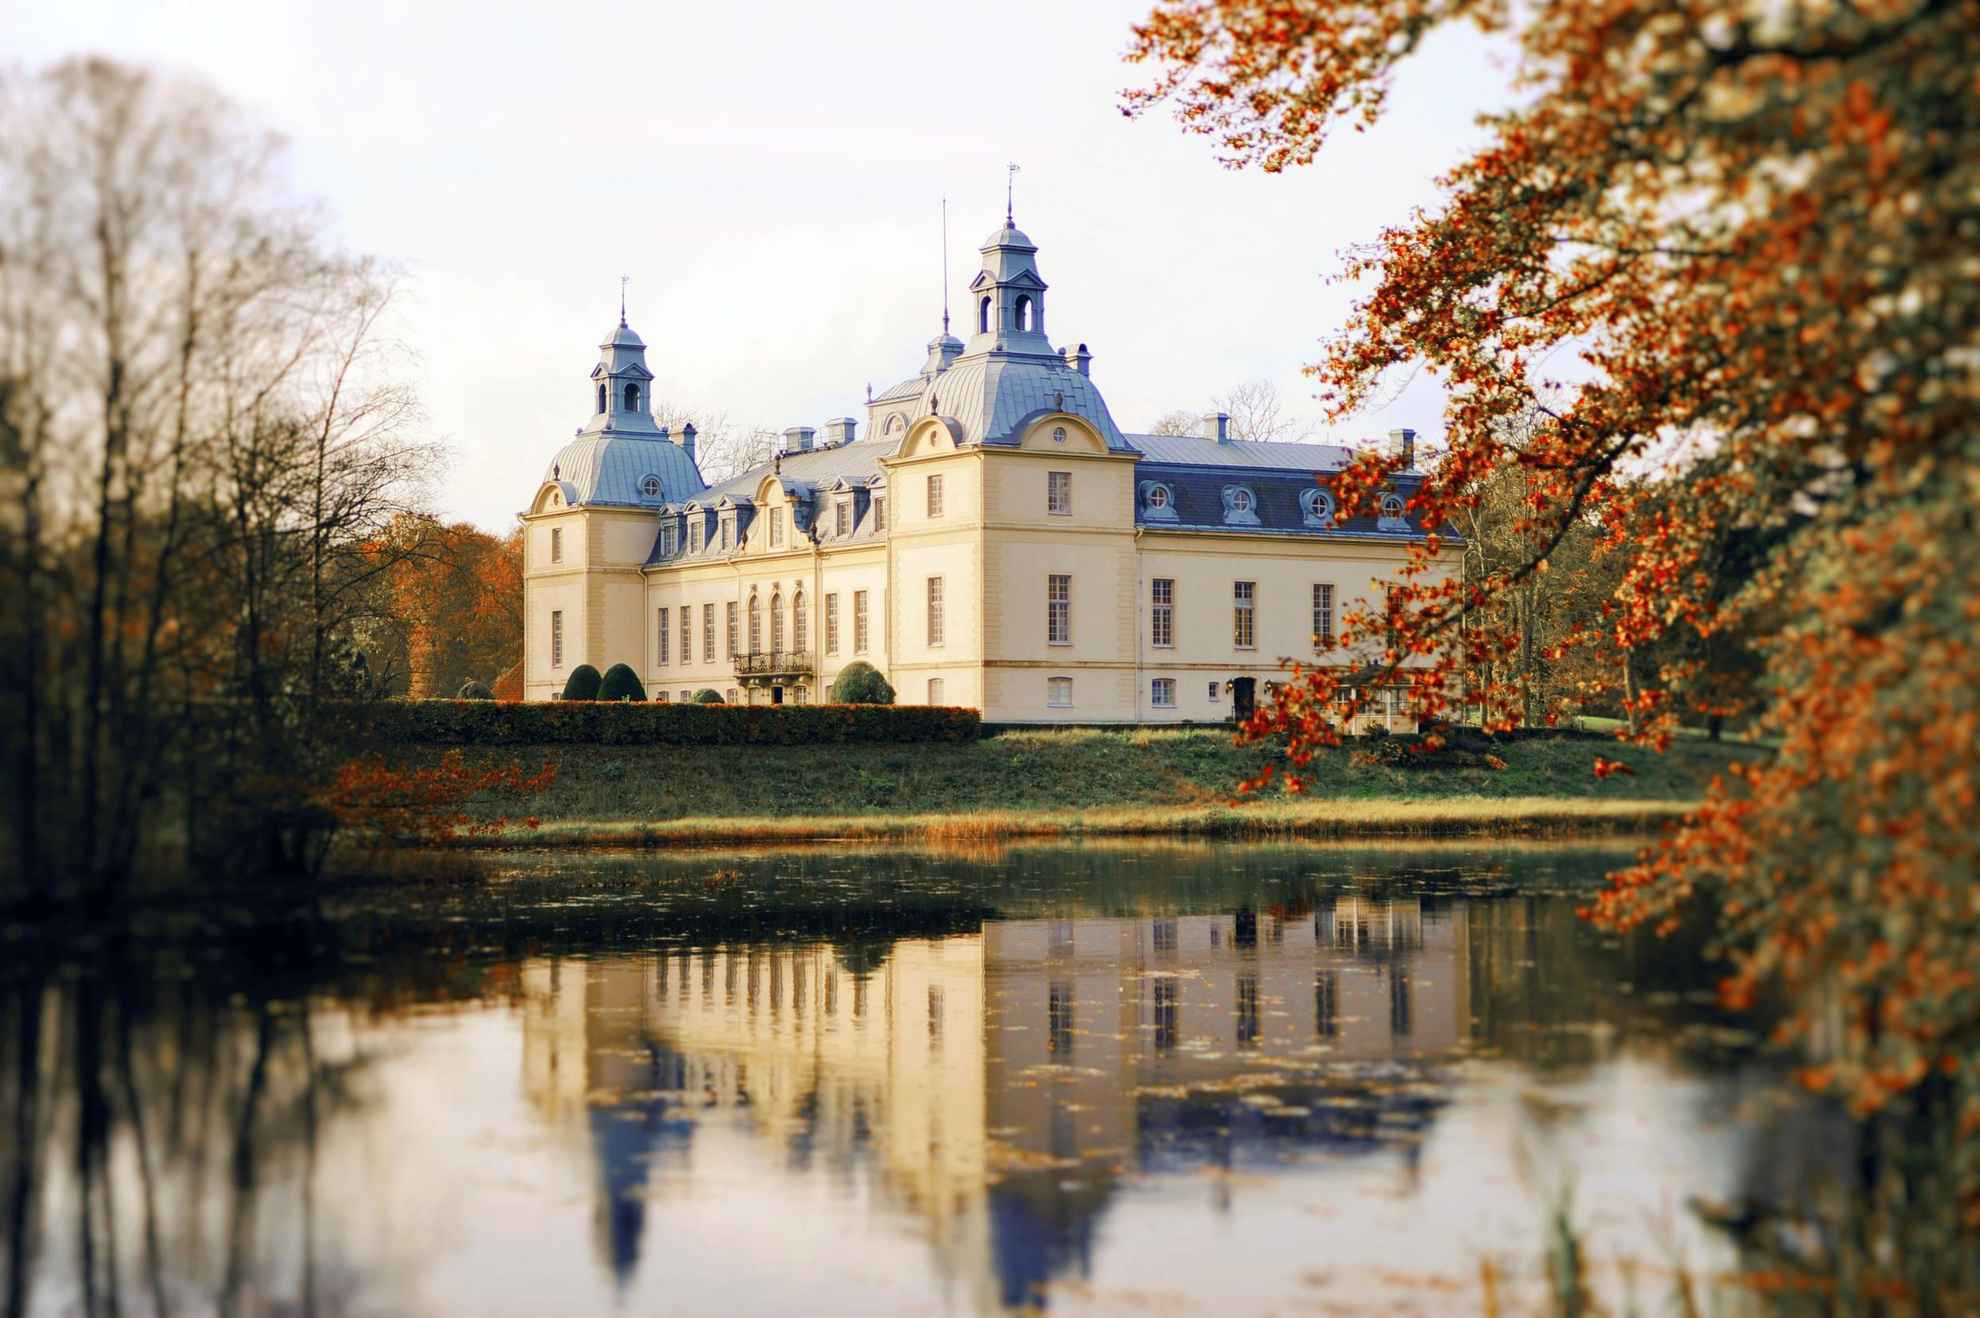 Kronovall Castle next to a lake during autumn. The castle is reflected in the water.